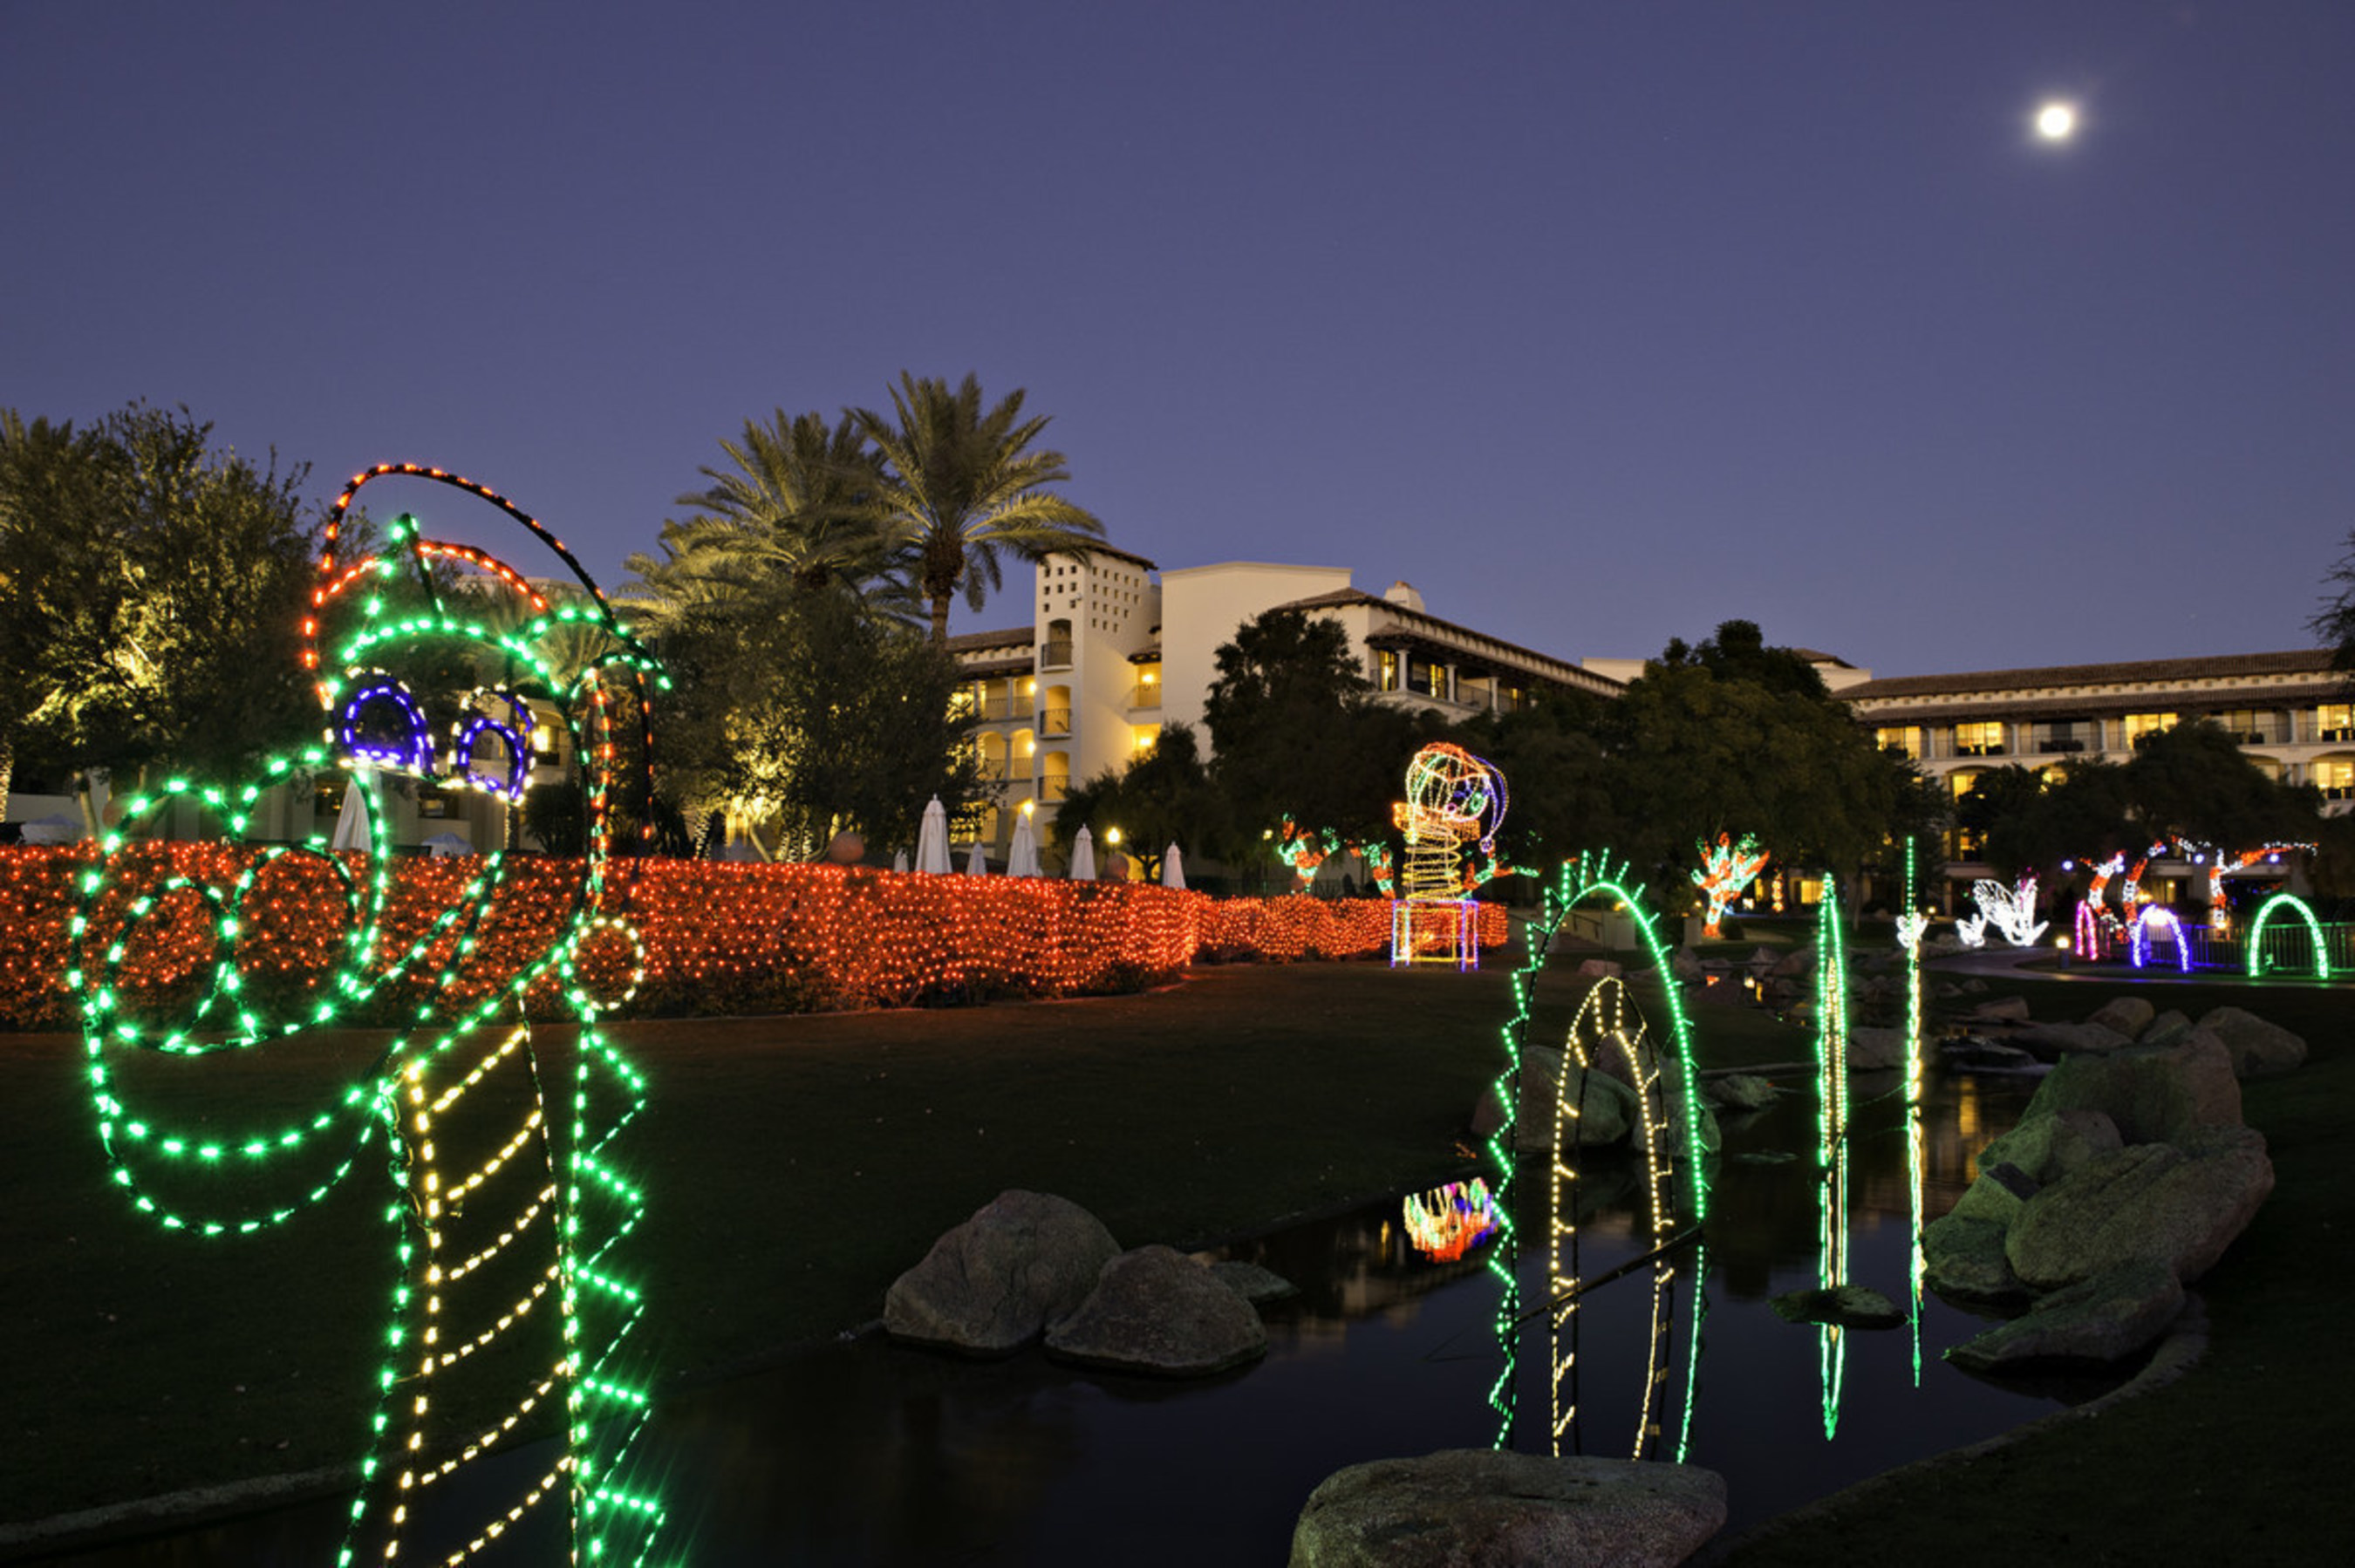 Nessie the Loch Ness Monster is just one of the sights along Lagoon Lights at the Christmas at the Princess festival at the Fairmont Scottsdale Princess in Arizona, featuring 2.8 million lights, a 4-story musical tree, the Princess Express Train, the Desert Ice Skating Rink made with real ice, along with new holiday characters, a petting zoo and Santa in his workshop. The celebration runs November 19, 2015-January 3, 2016.